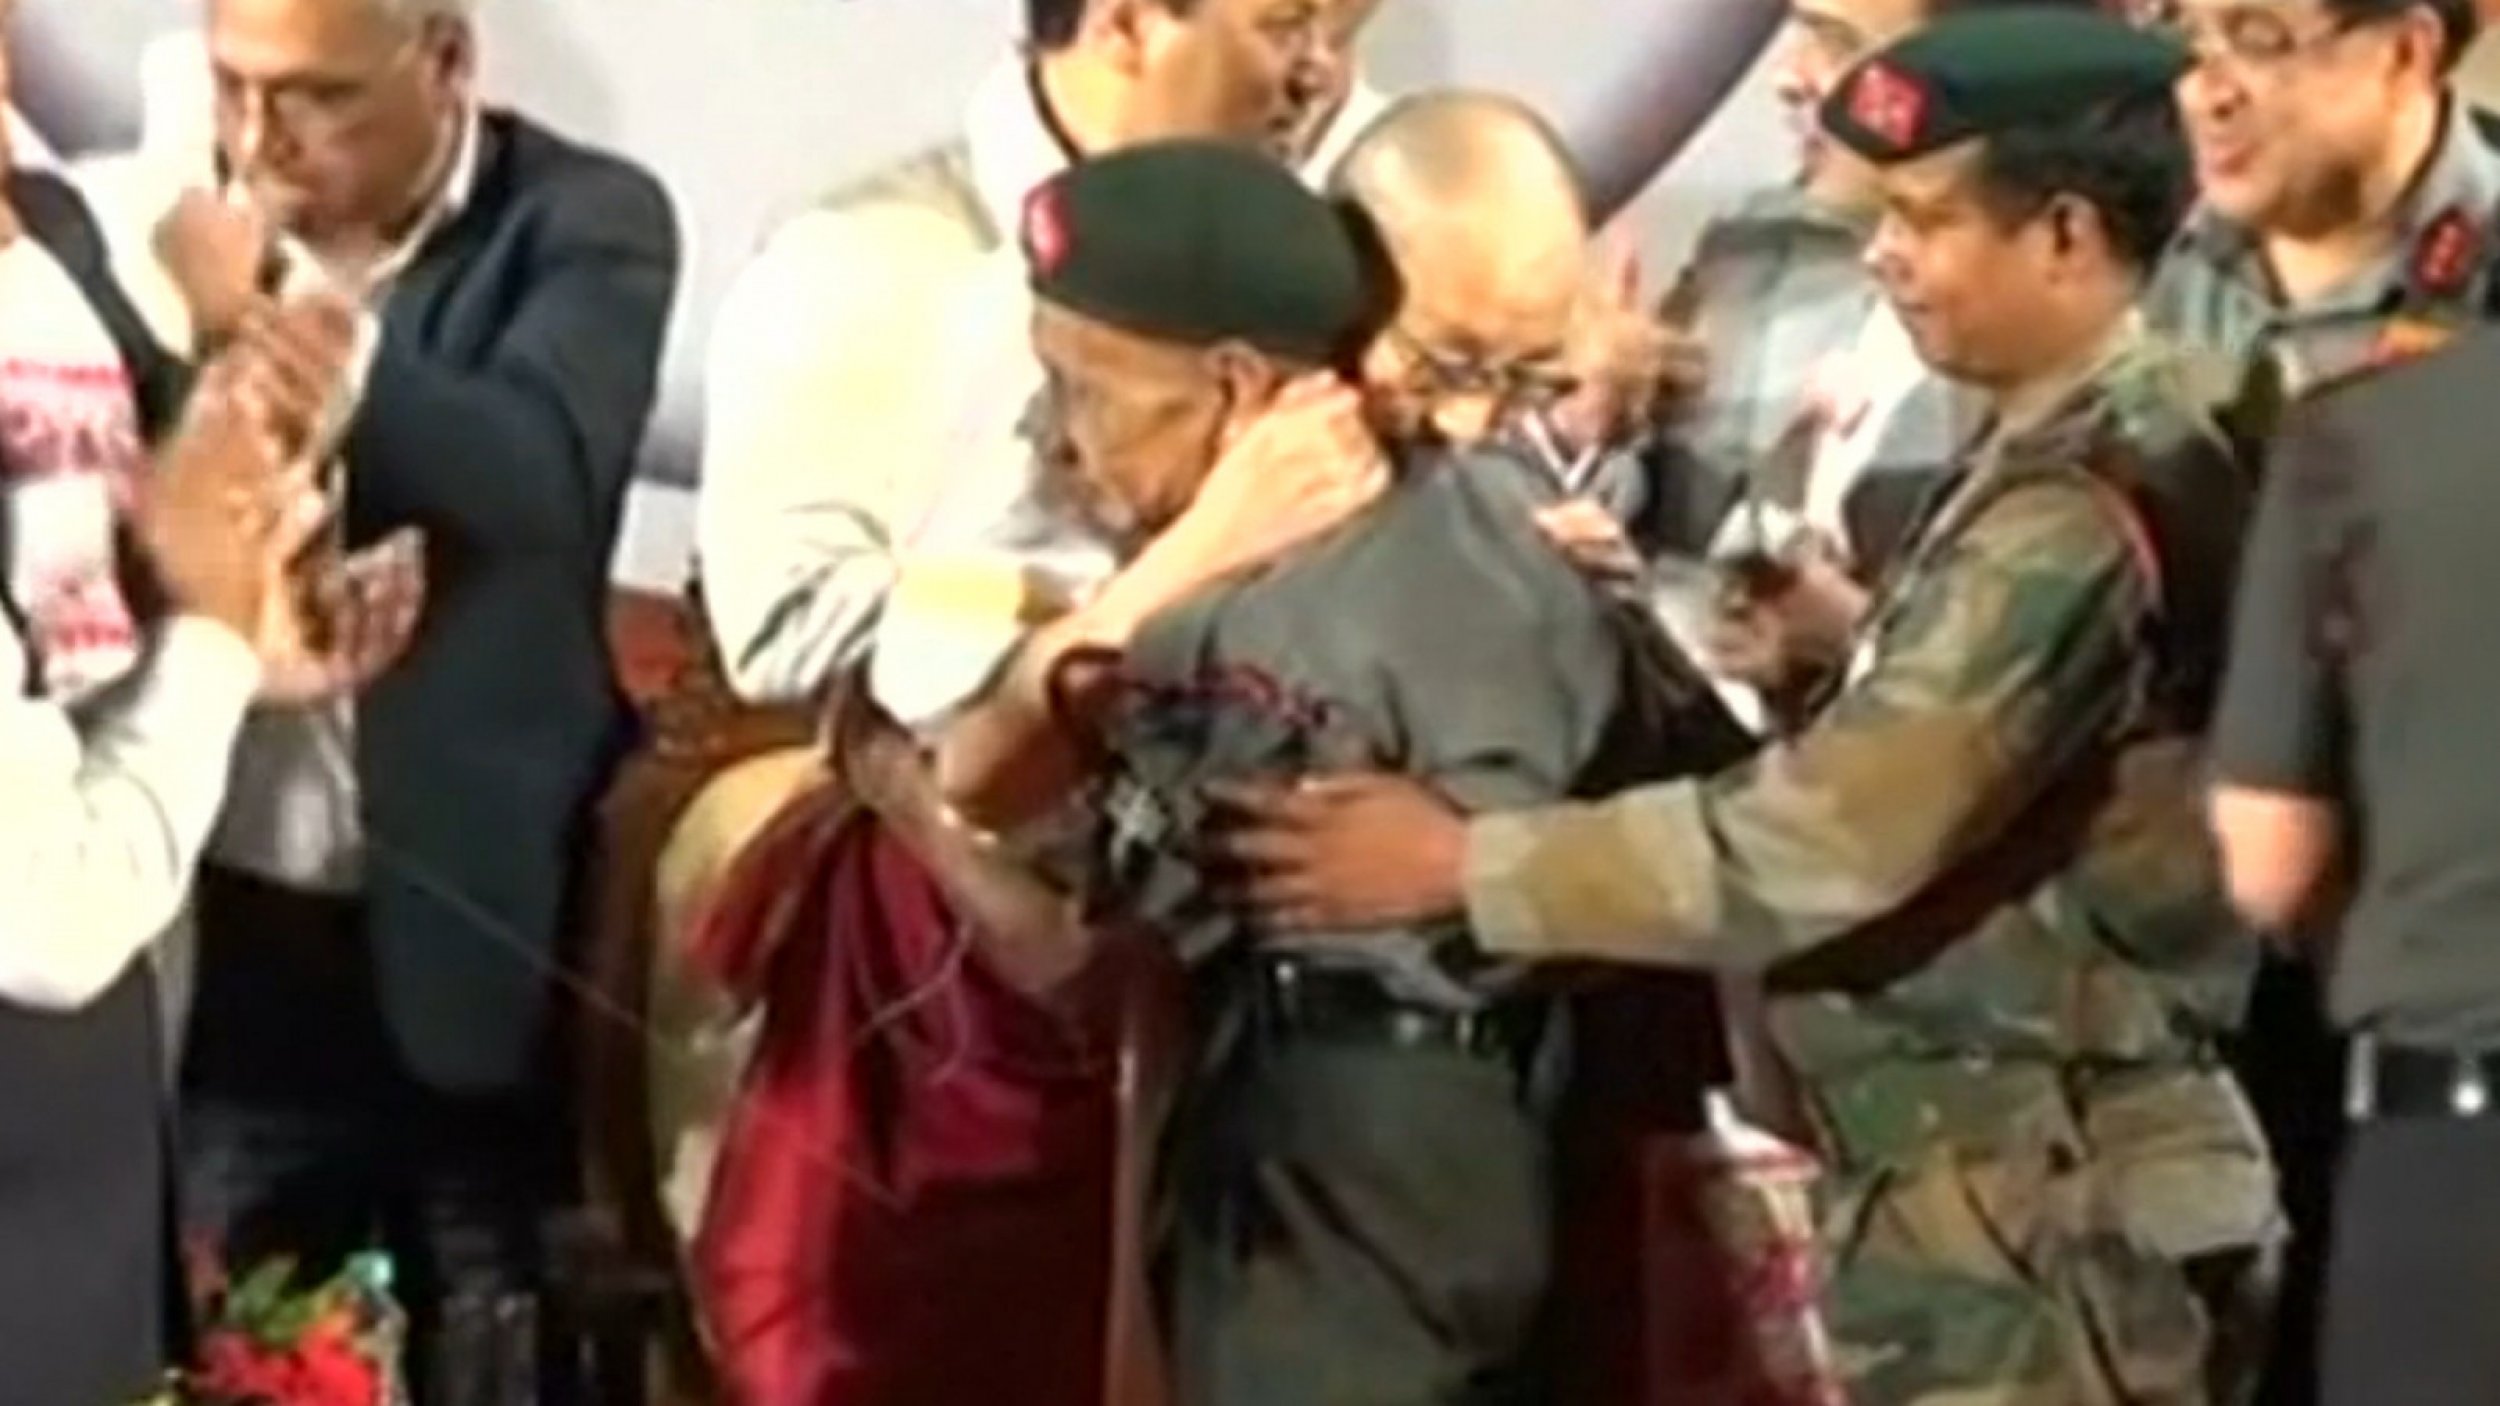 Dalai Lama has emotional reunion with guard who escorted him to safety